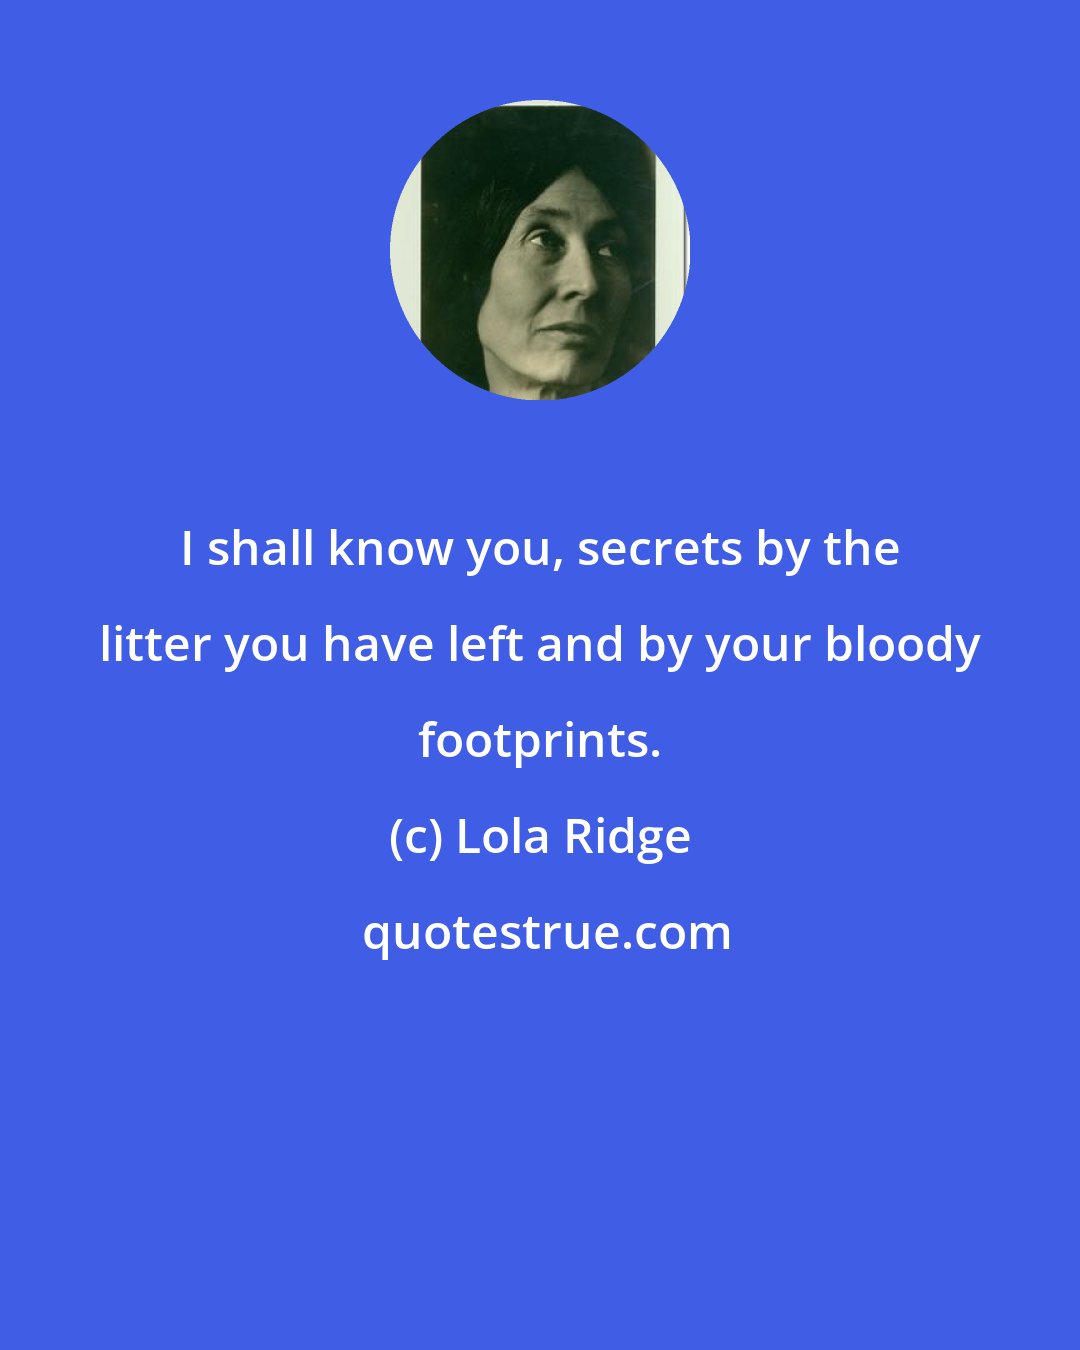 Lola Ridge: I shall know you, secrets by the litter you have left and by your bloody footprints.